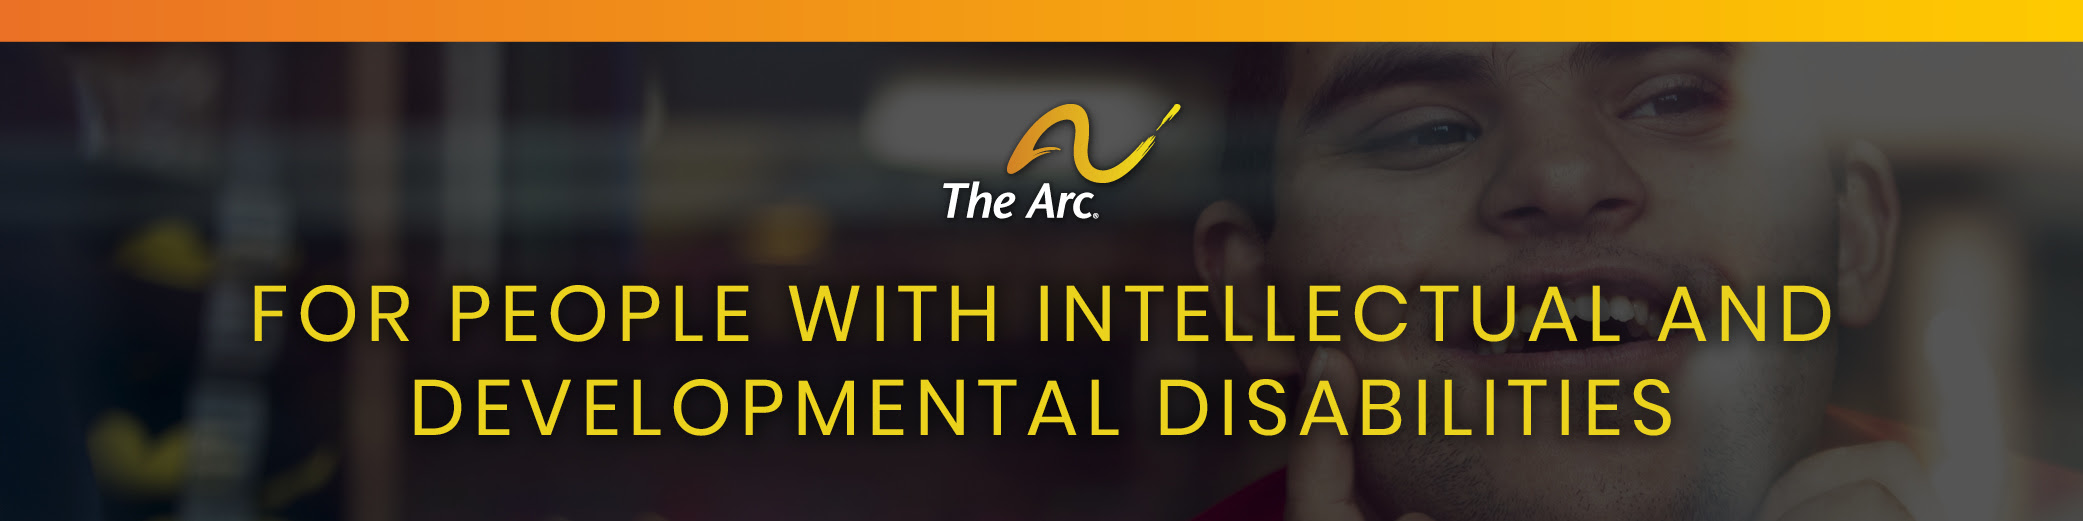 The Arc - For People With Intellectual and Developmental Disabilities